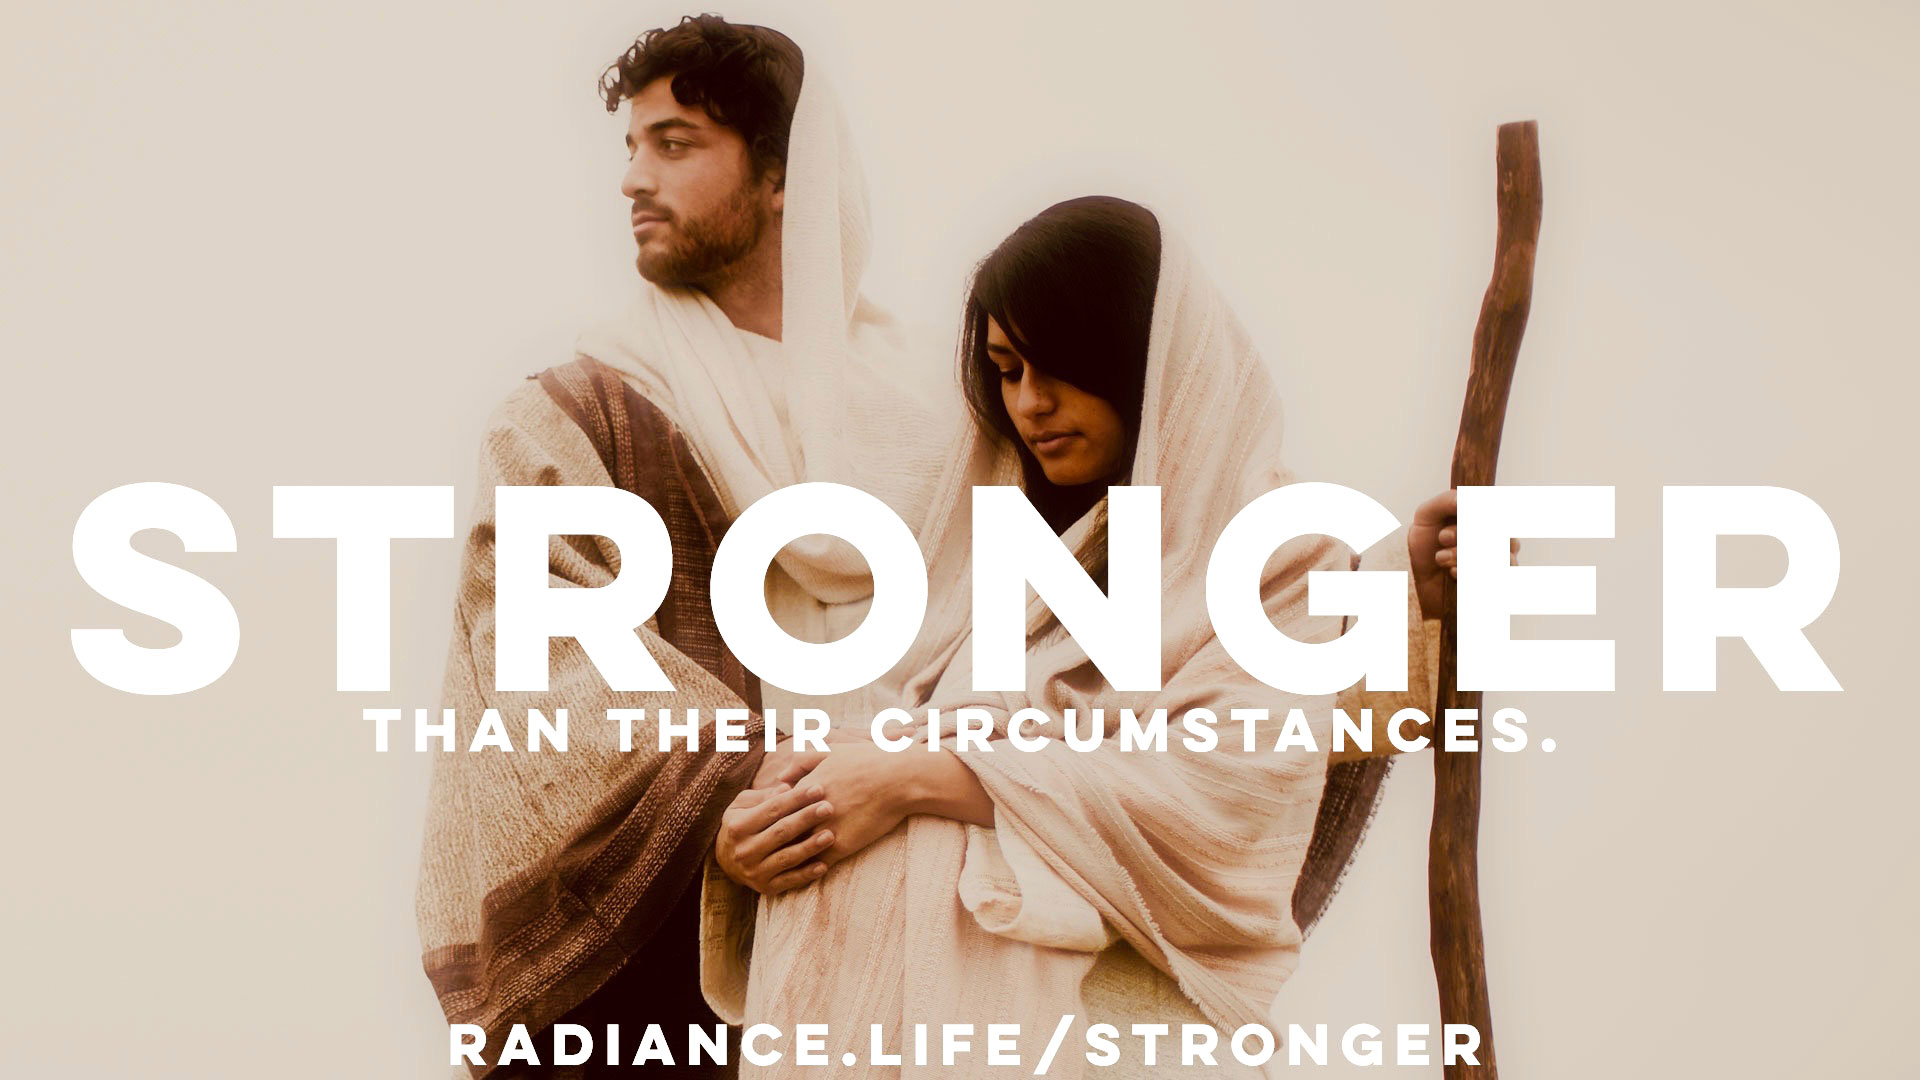 "Stronger" by The Radiance Foundation